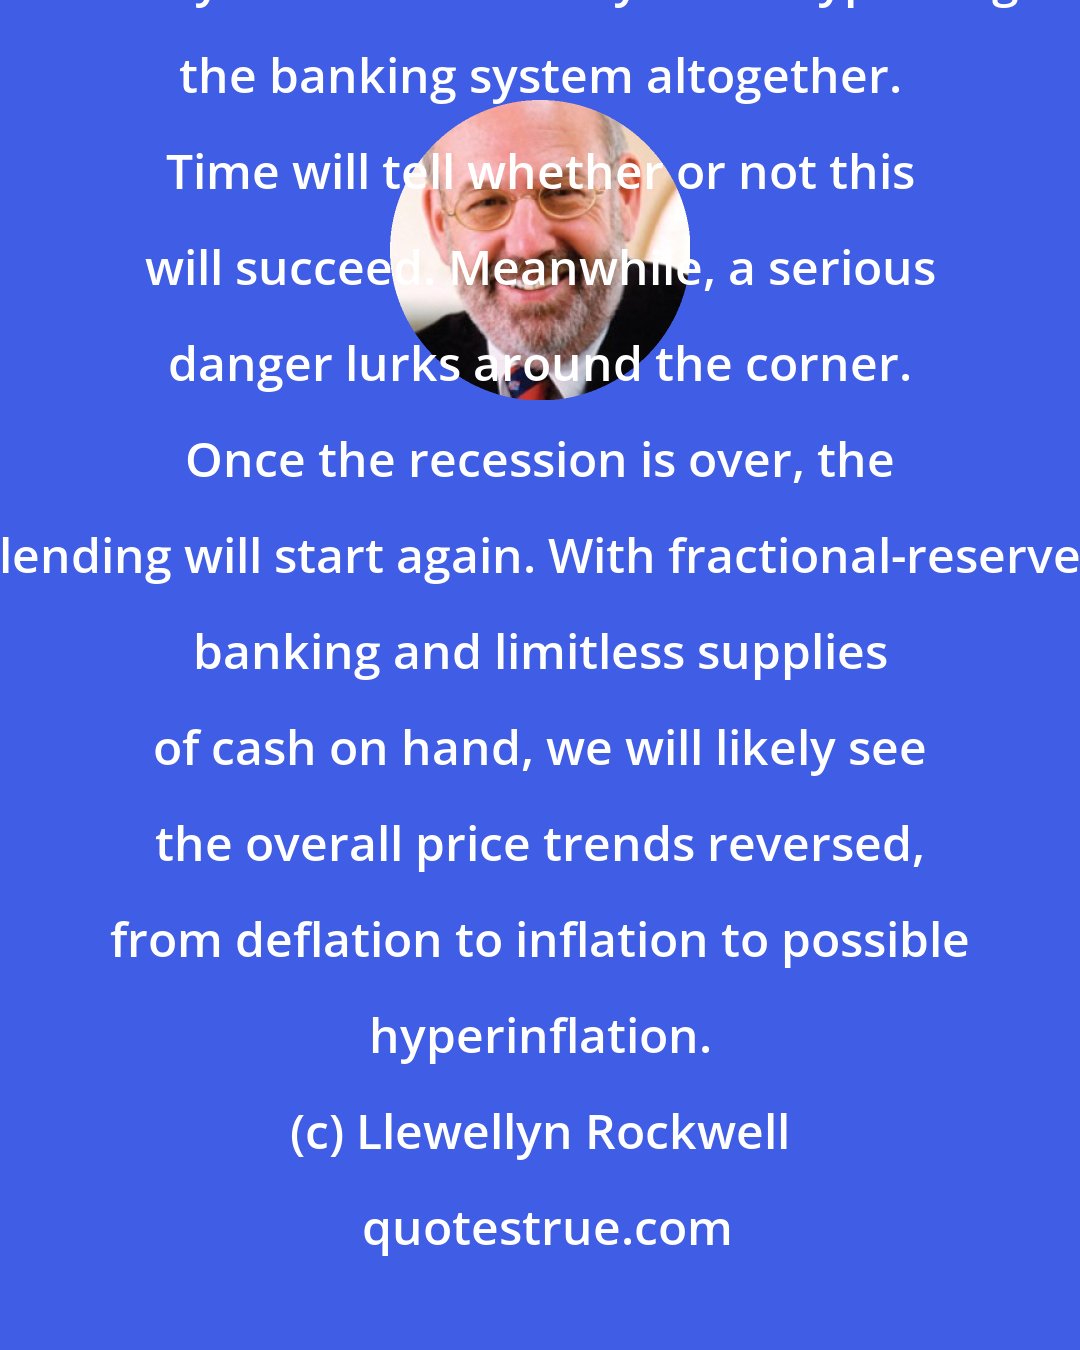 Llewellyn Rockwell: The Fed is pushing a variety of workarounds that would inject trillions in new money into the economy while bypassing the banking system altogether. Time will tell whether or not this will succeed. Meanwhile, a serious danger lurks around the corner. Once the recession is over, the lending will start again. With fractional-reserve banking and limitless supplies of cash on hand, we will likely see the overall price trends reversed, from deflation to inflation to possible hyperinflation.